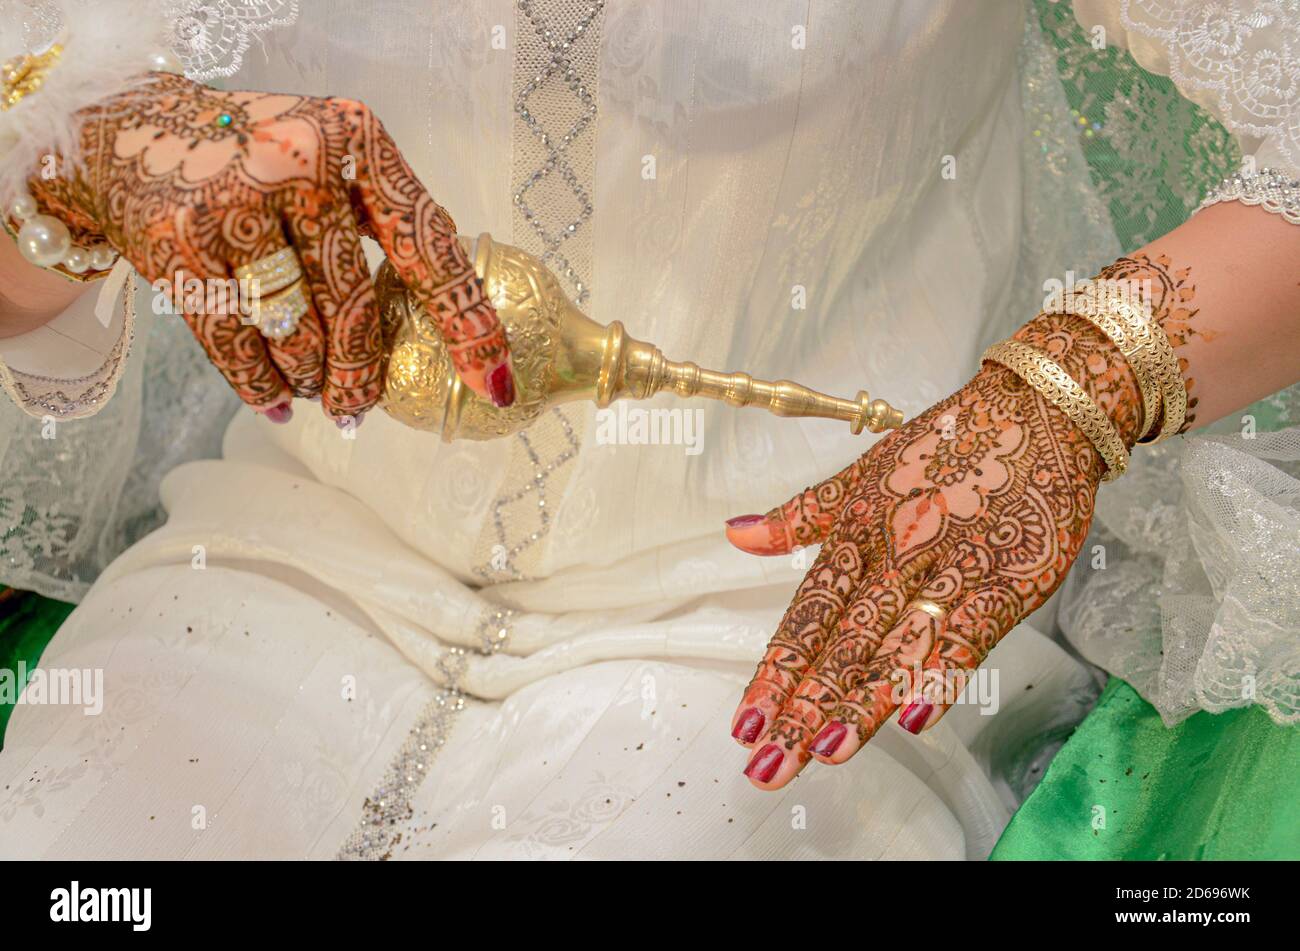 The hand of the Arab bride is tattooed with red henna. Arab wedding traditions Stock Photo